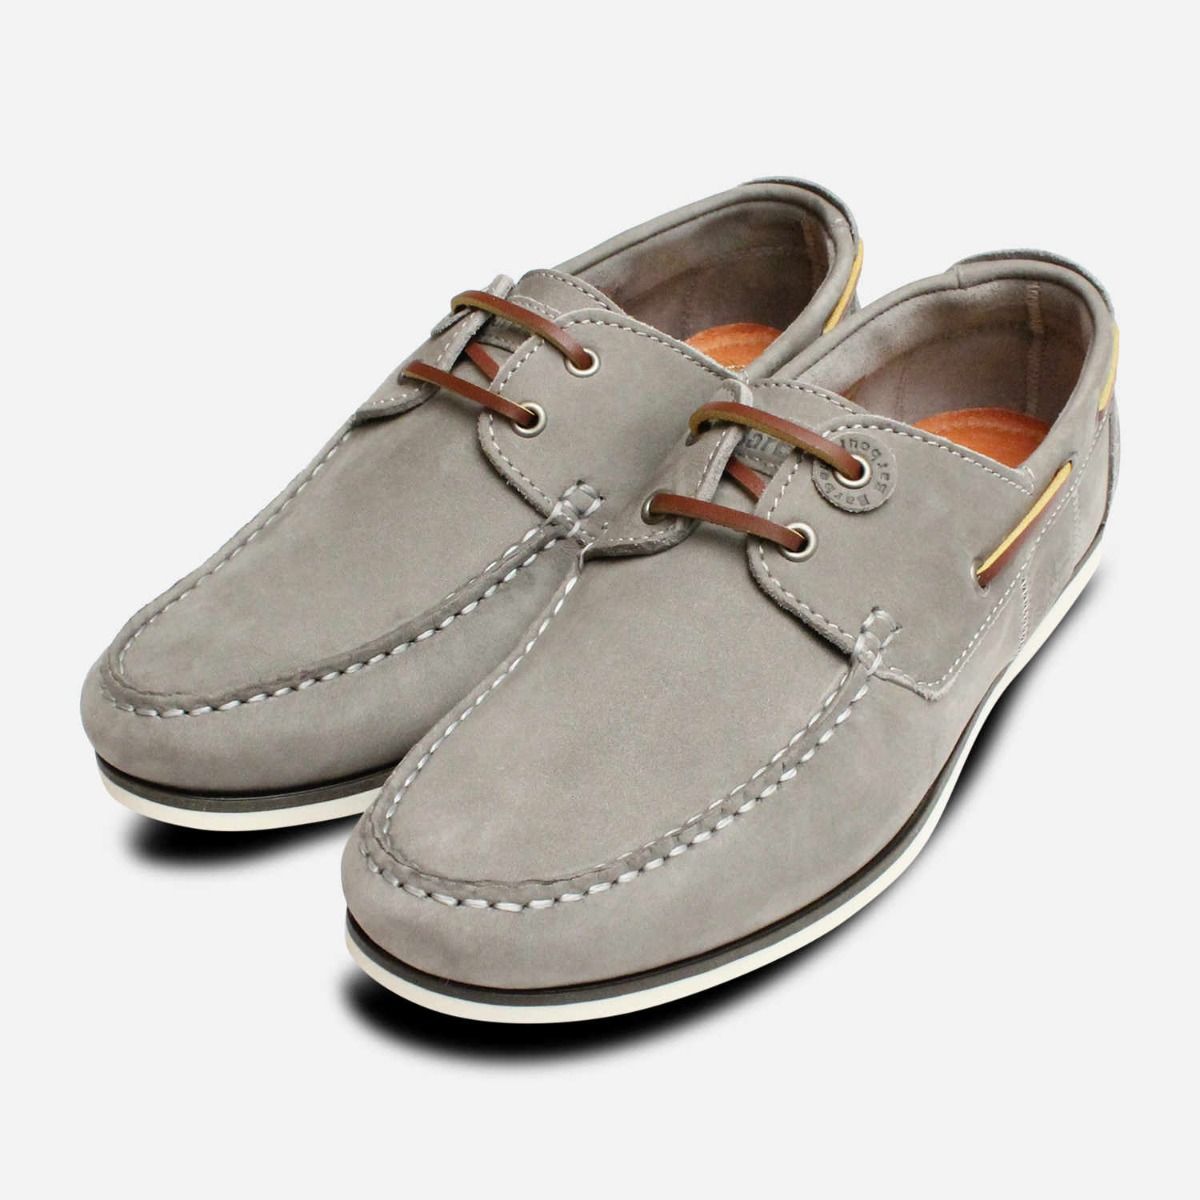 Grey Nubuck Leather Capstan Boat Shoes